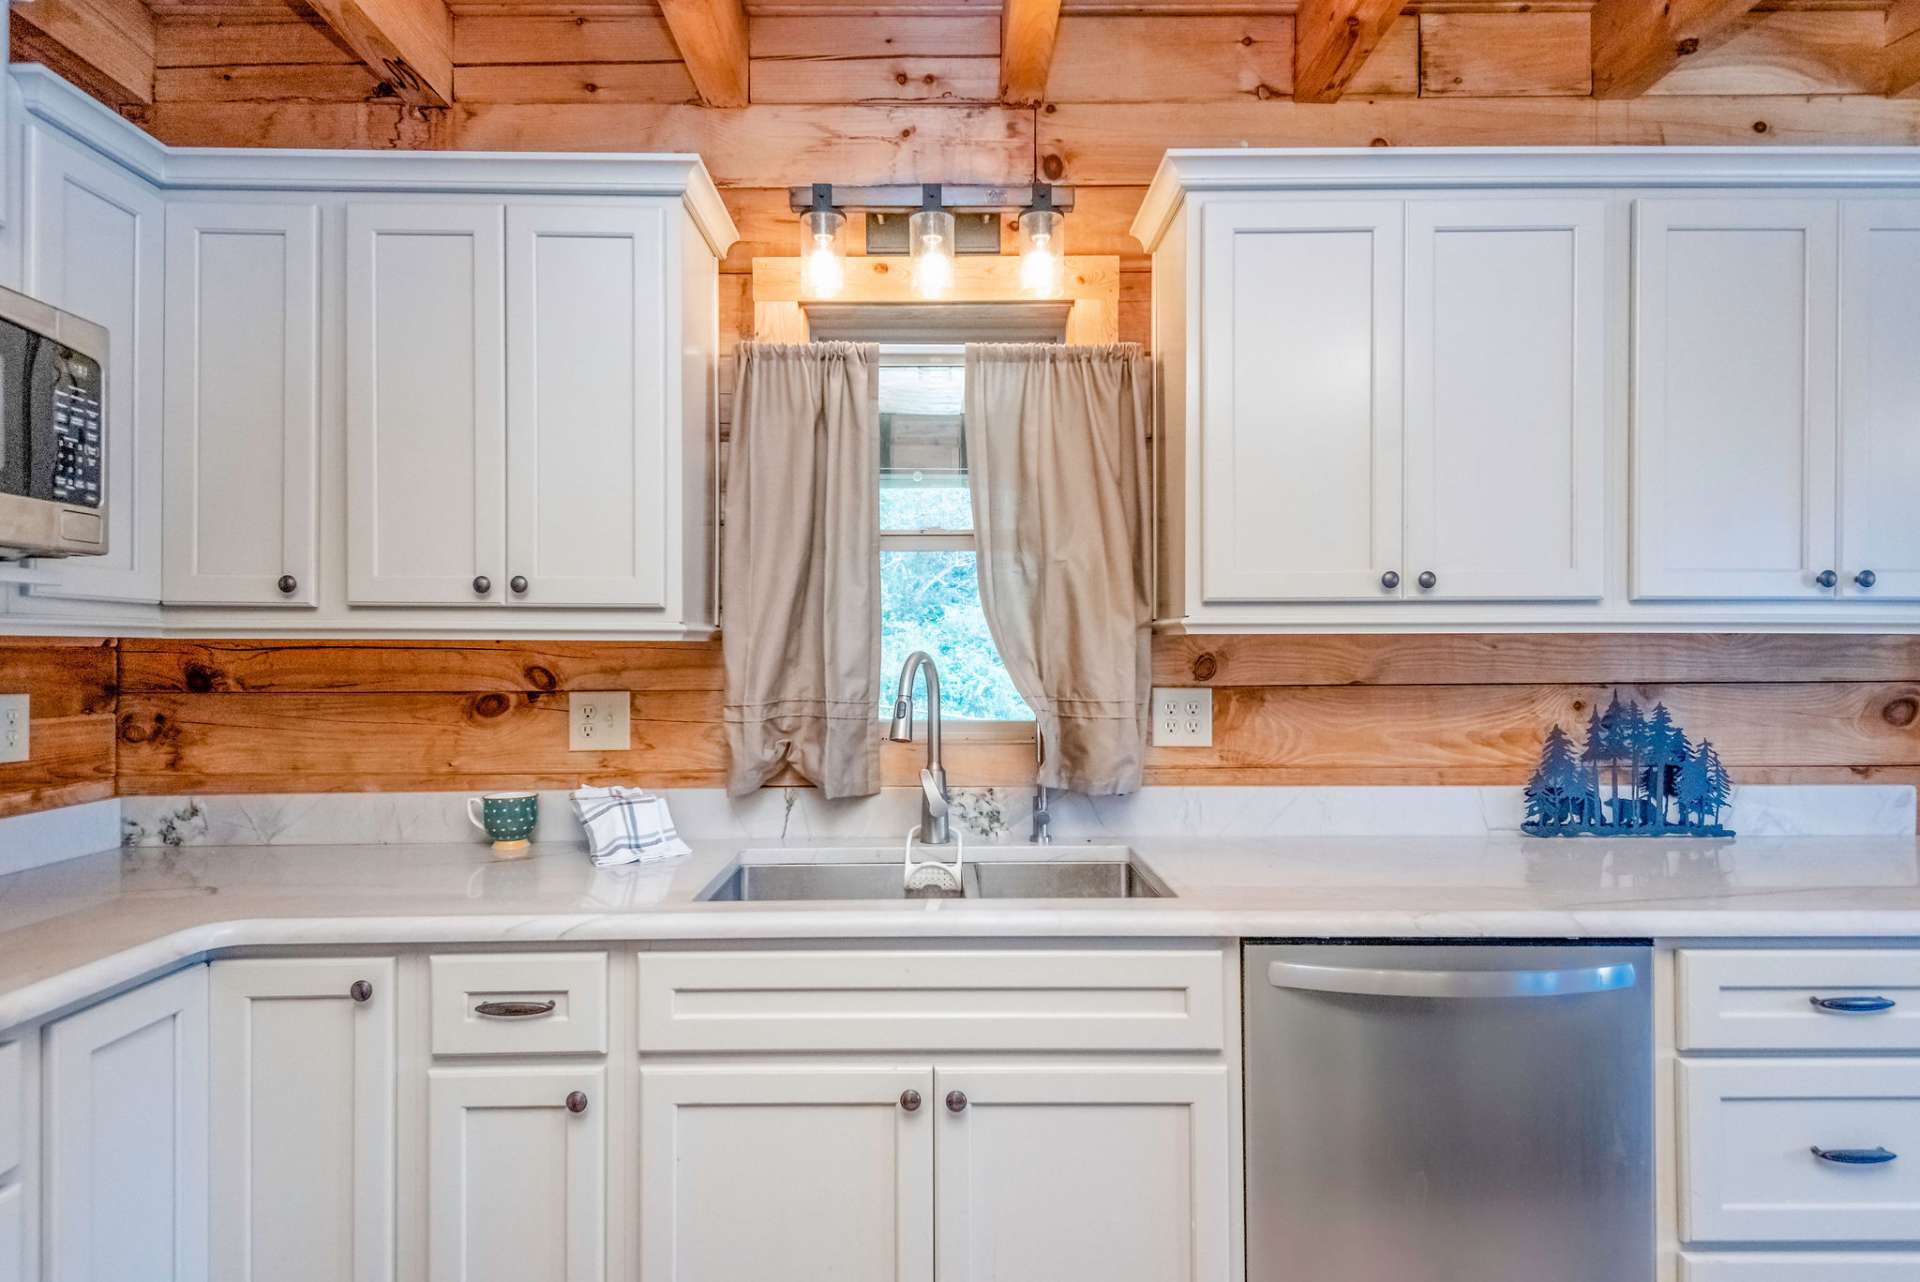 Farmhouse sink, stainless appliances, and intriguing lightening are all part of the charm of this kitchen.